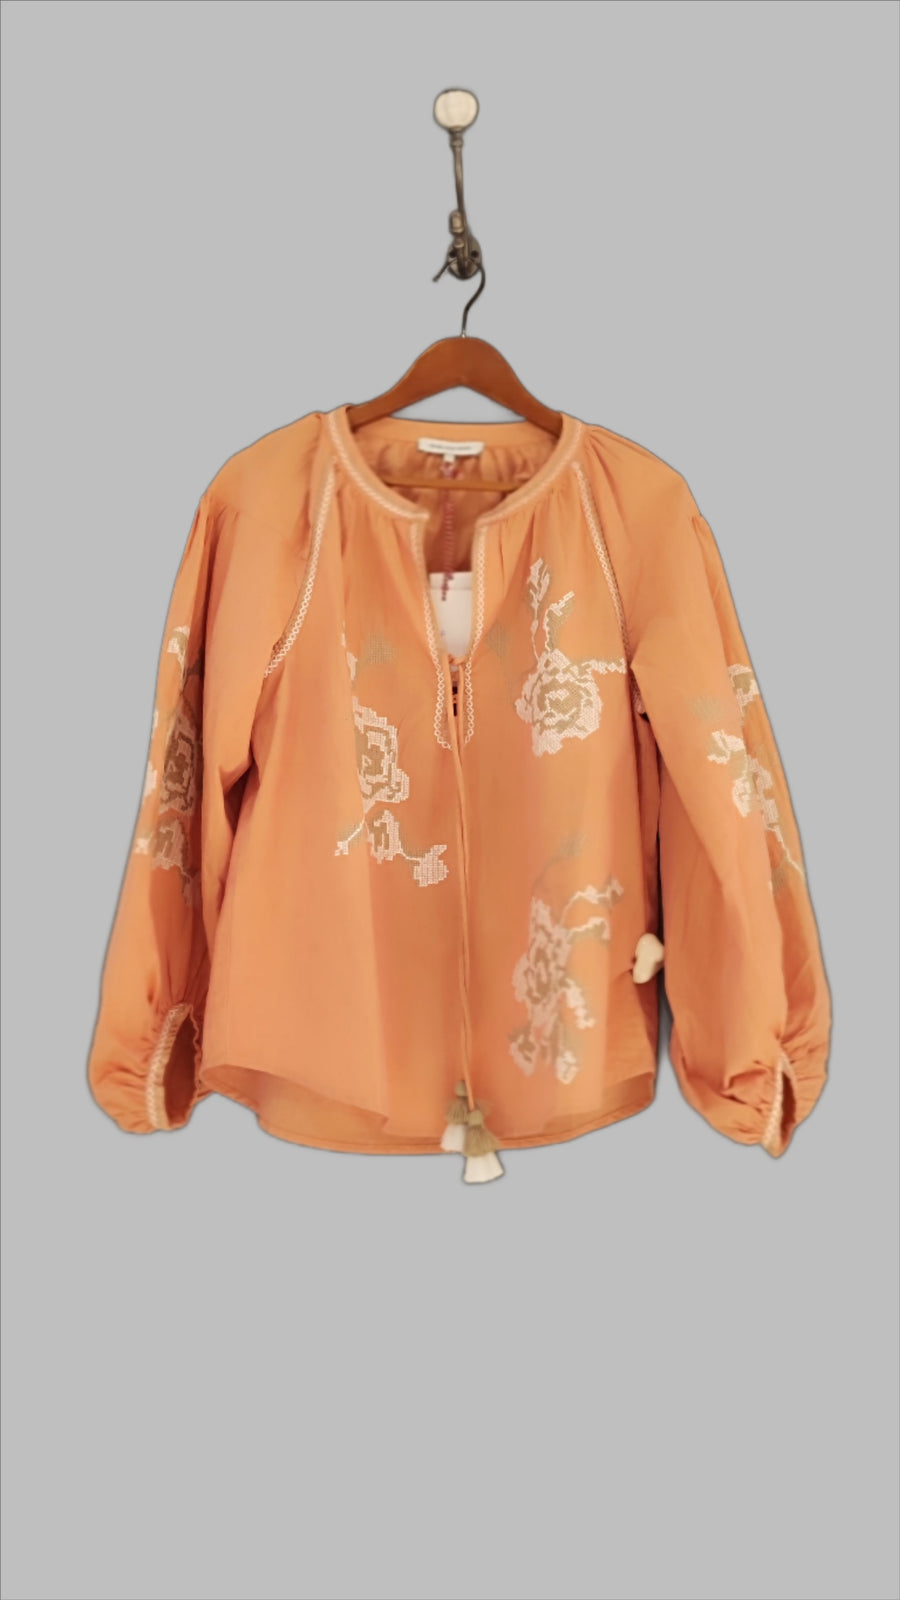 ROSE AND ROSE MALCASIN APRICOT TOP WITH CREAM/TAN FLORAL EMBROIDERY DETAIL